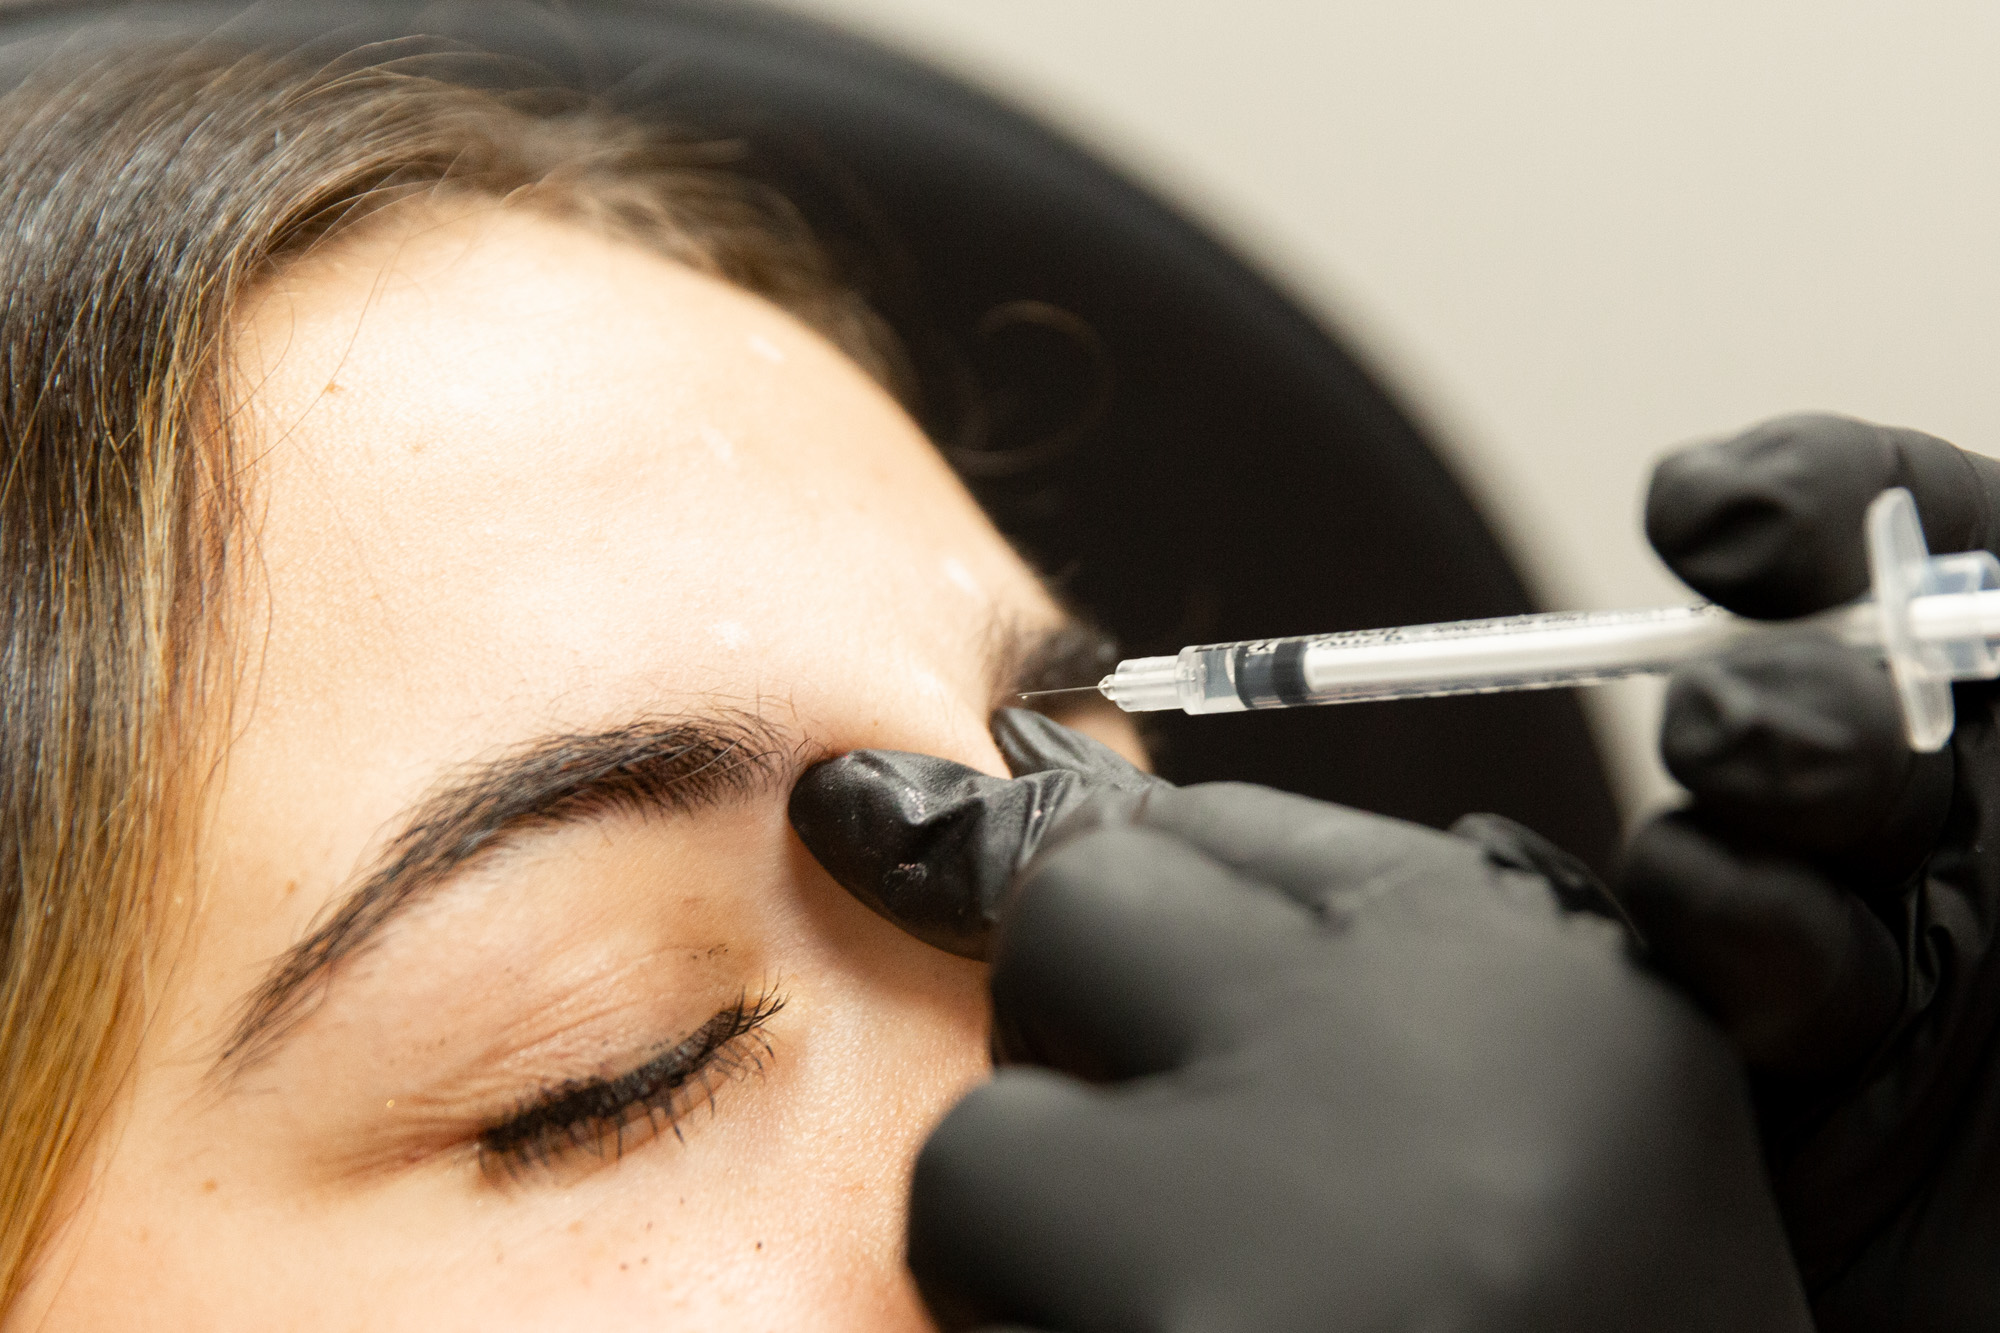 Marcos Medical provider holds Botox shot just above female client's skin between her eyebrows.